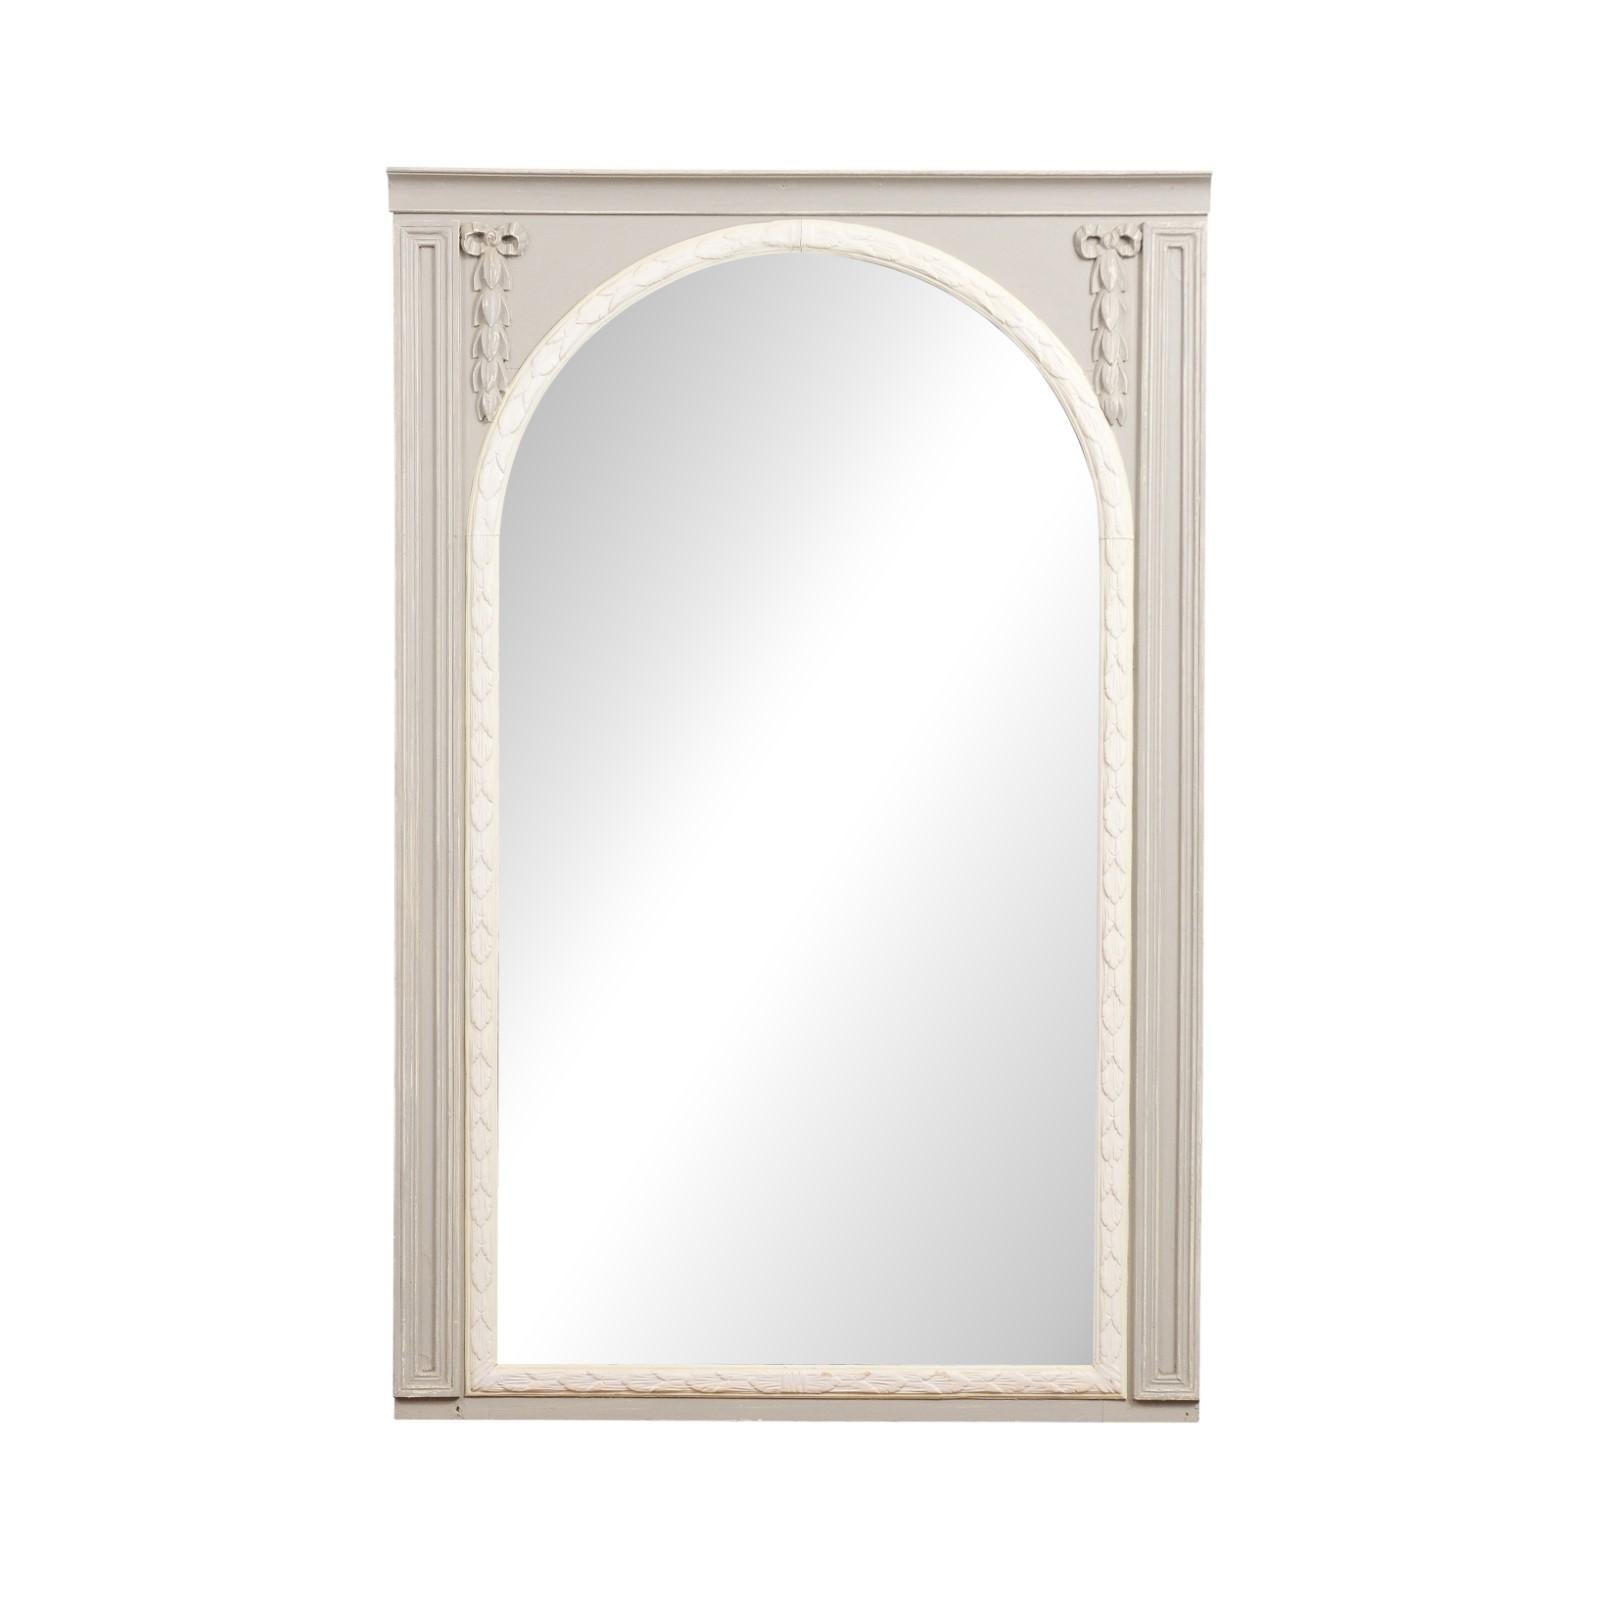 A French two-toned painted wood trumeau mirror from the early 20th century with carved foliage, ribbon-tied motifs and arched mirror plate. Created in France at the Turn of the Century, this trumeau mirror features a two-toned finish showcasing a